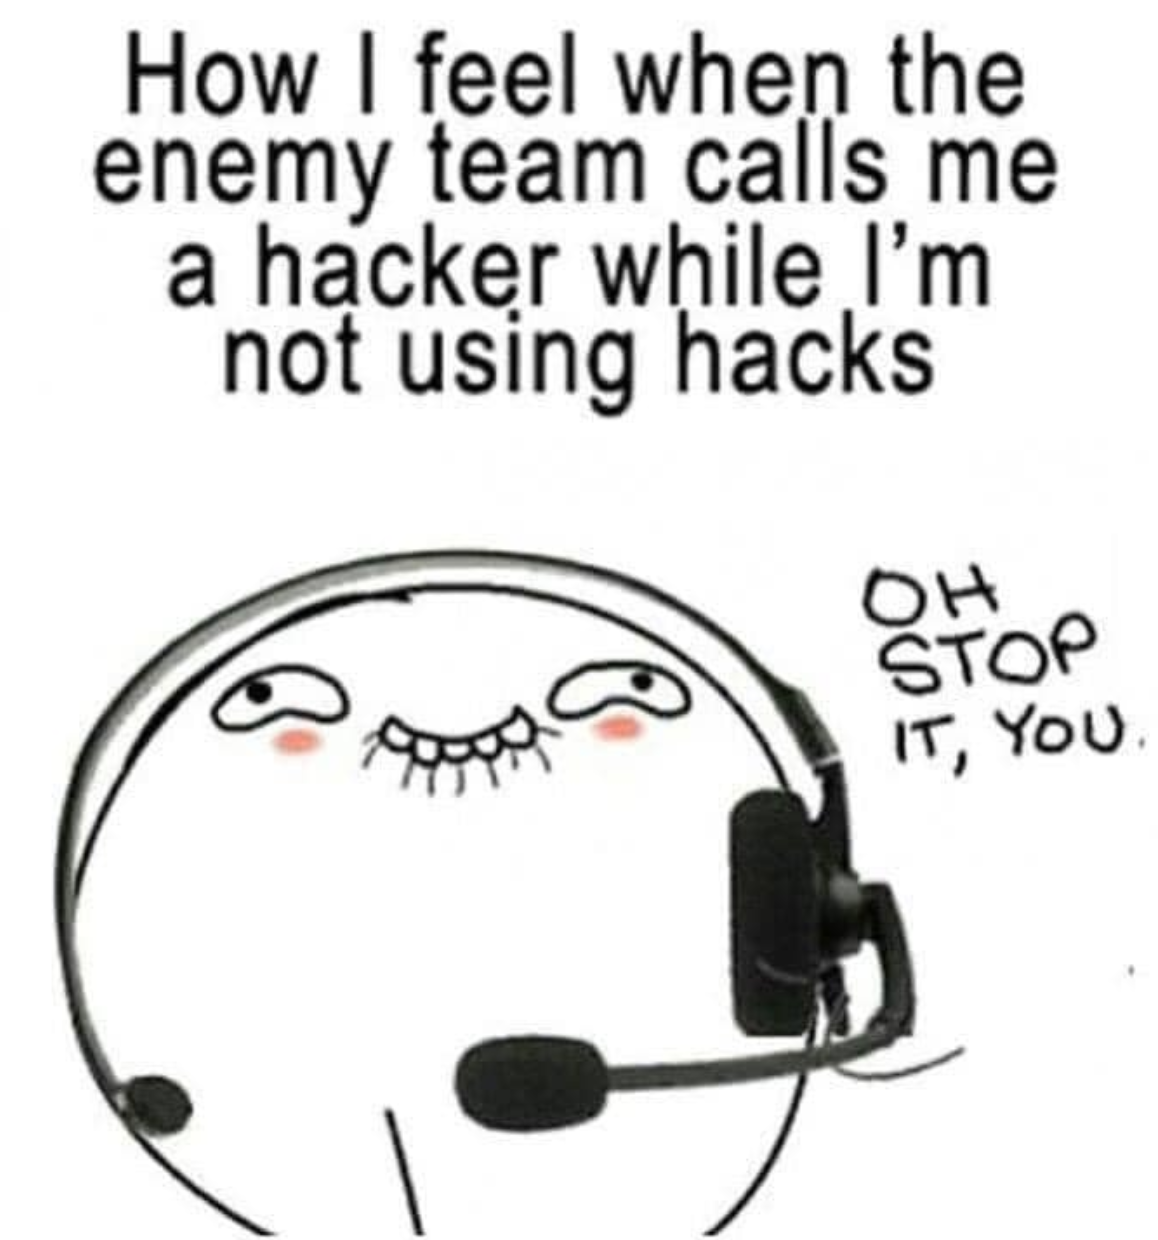 funny gaming memes - communication - How I feel when the enemy team calls me a hacker while I'm not using hacks Oh Stop It, You